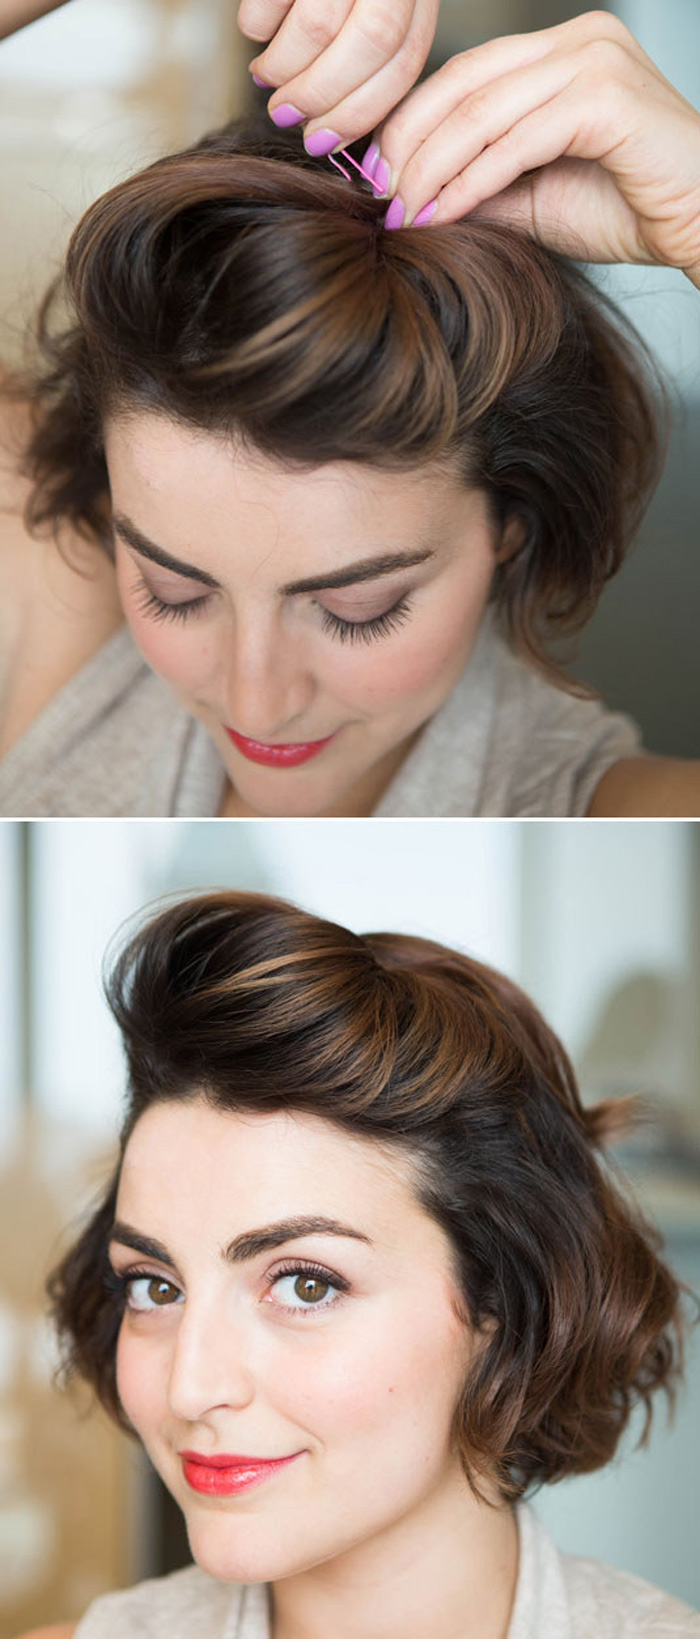 These Hairstyling Hacks Will Get You Through the Awkward Bangs Stages 9